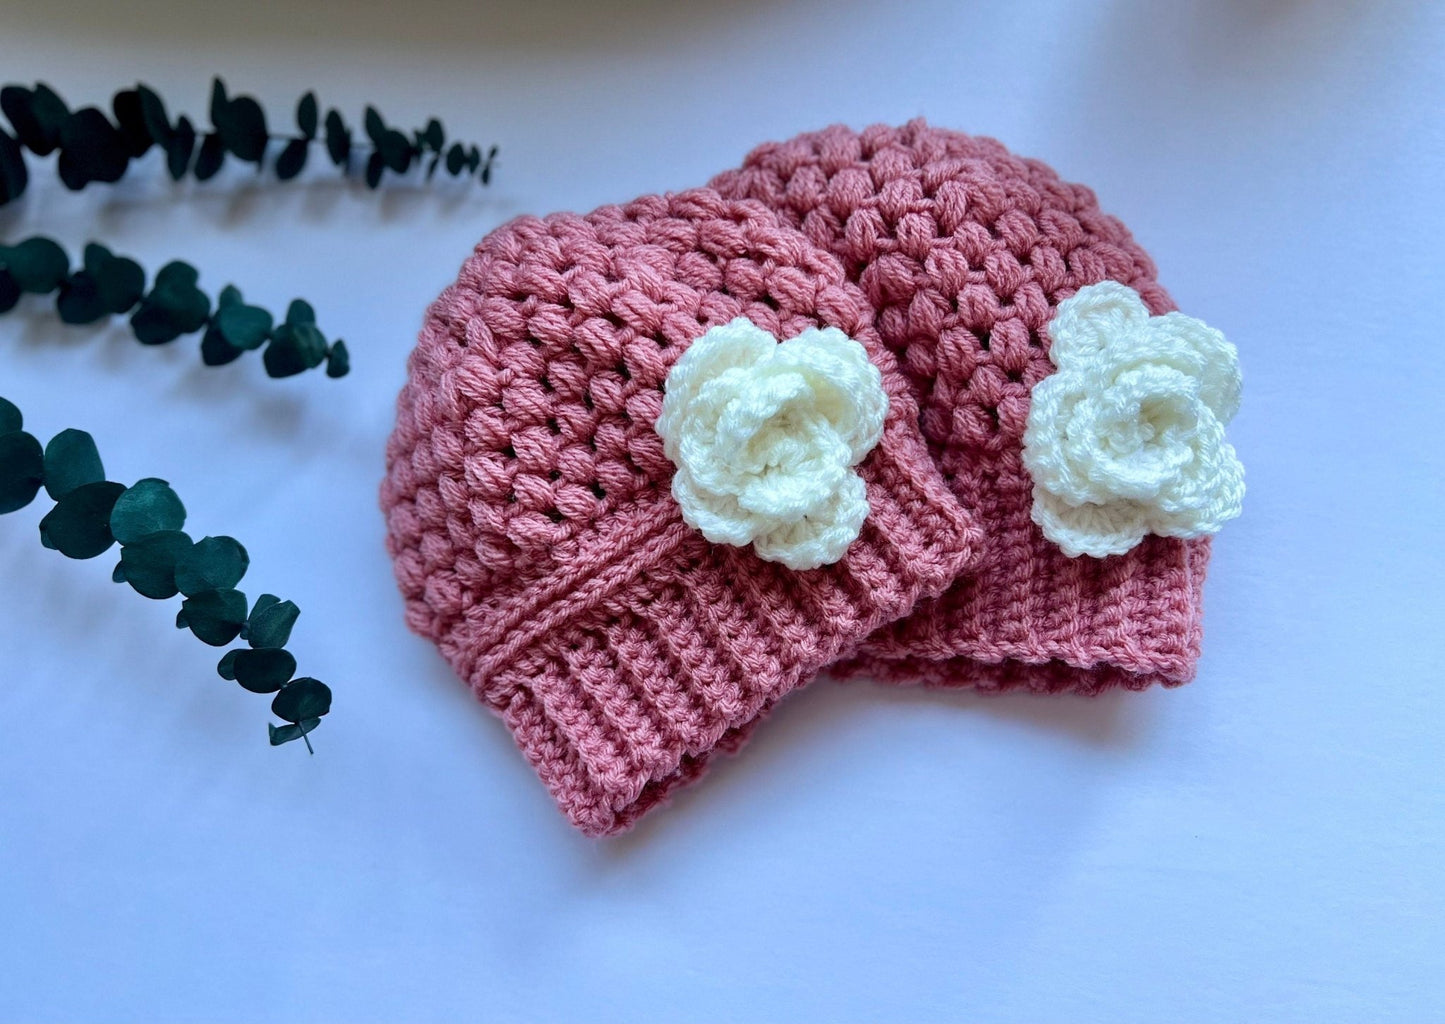 Stylish trendy crochet hat for girl, pink hat with white crochet flower, child size, “mom and me” hat set, great gift - Lilly Grace Sparkle Boutique